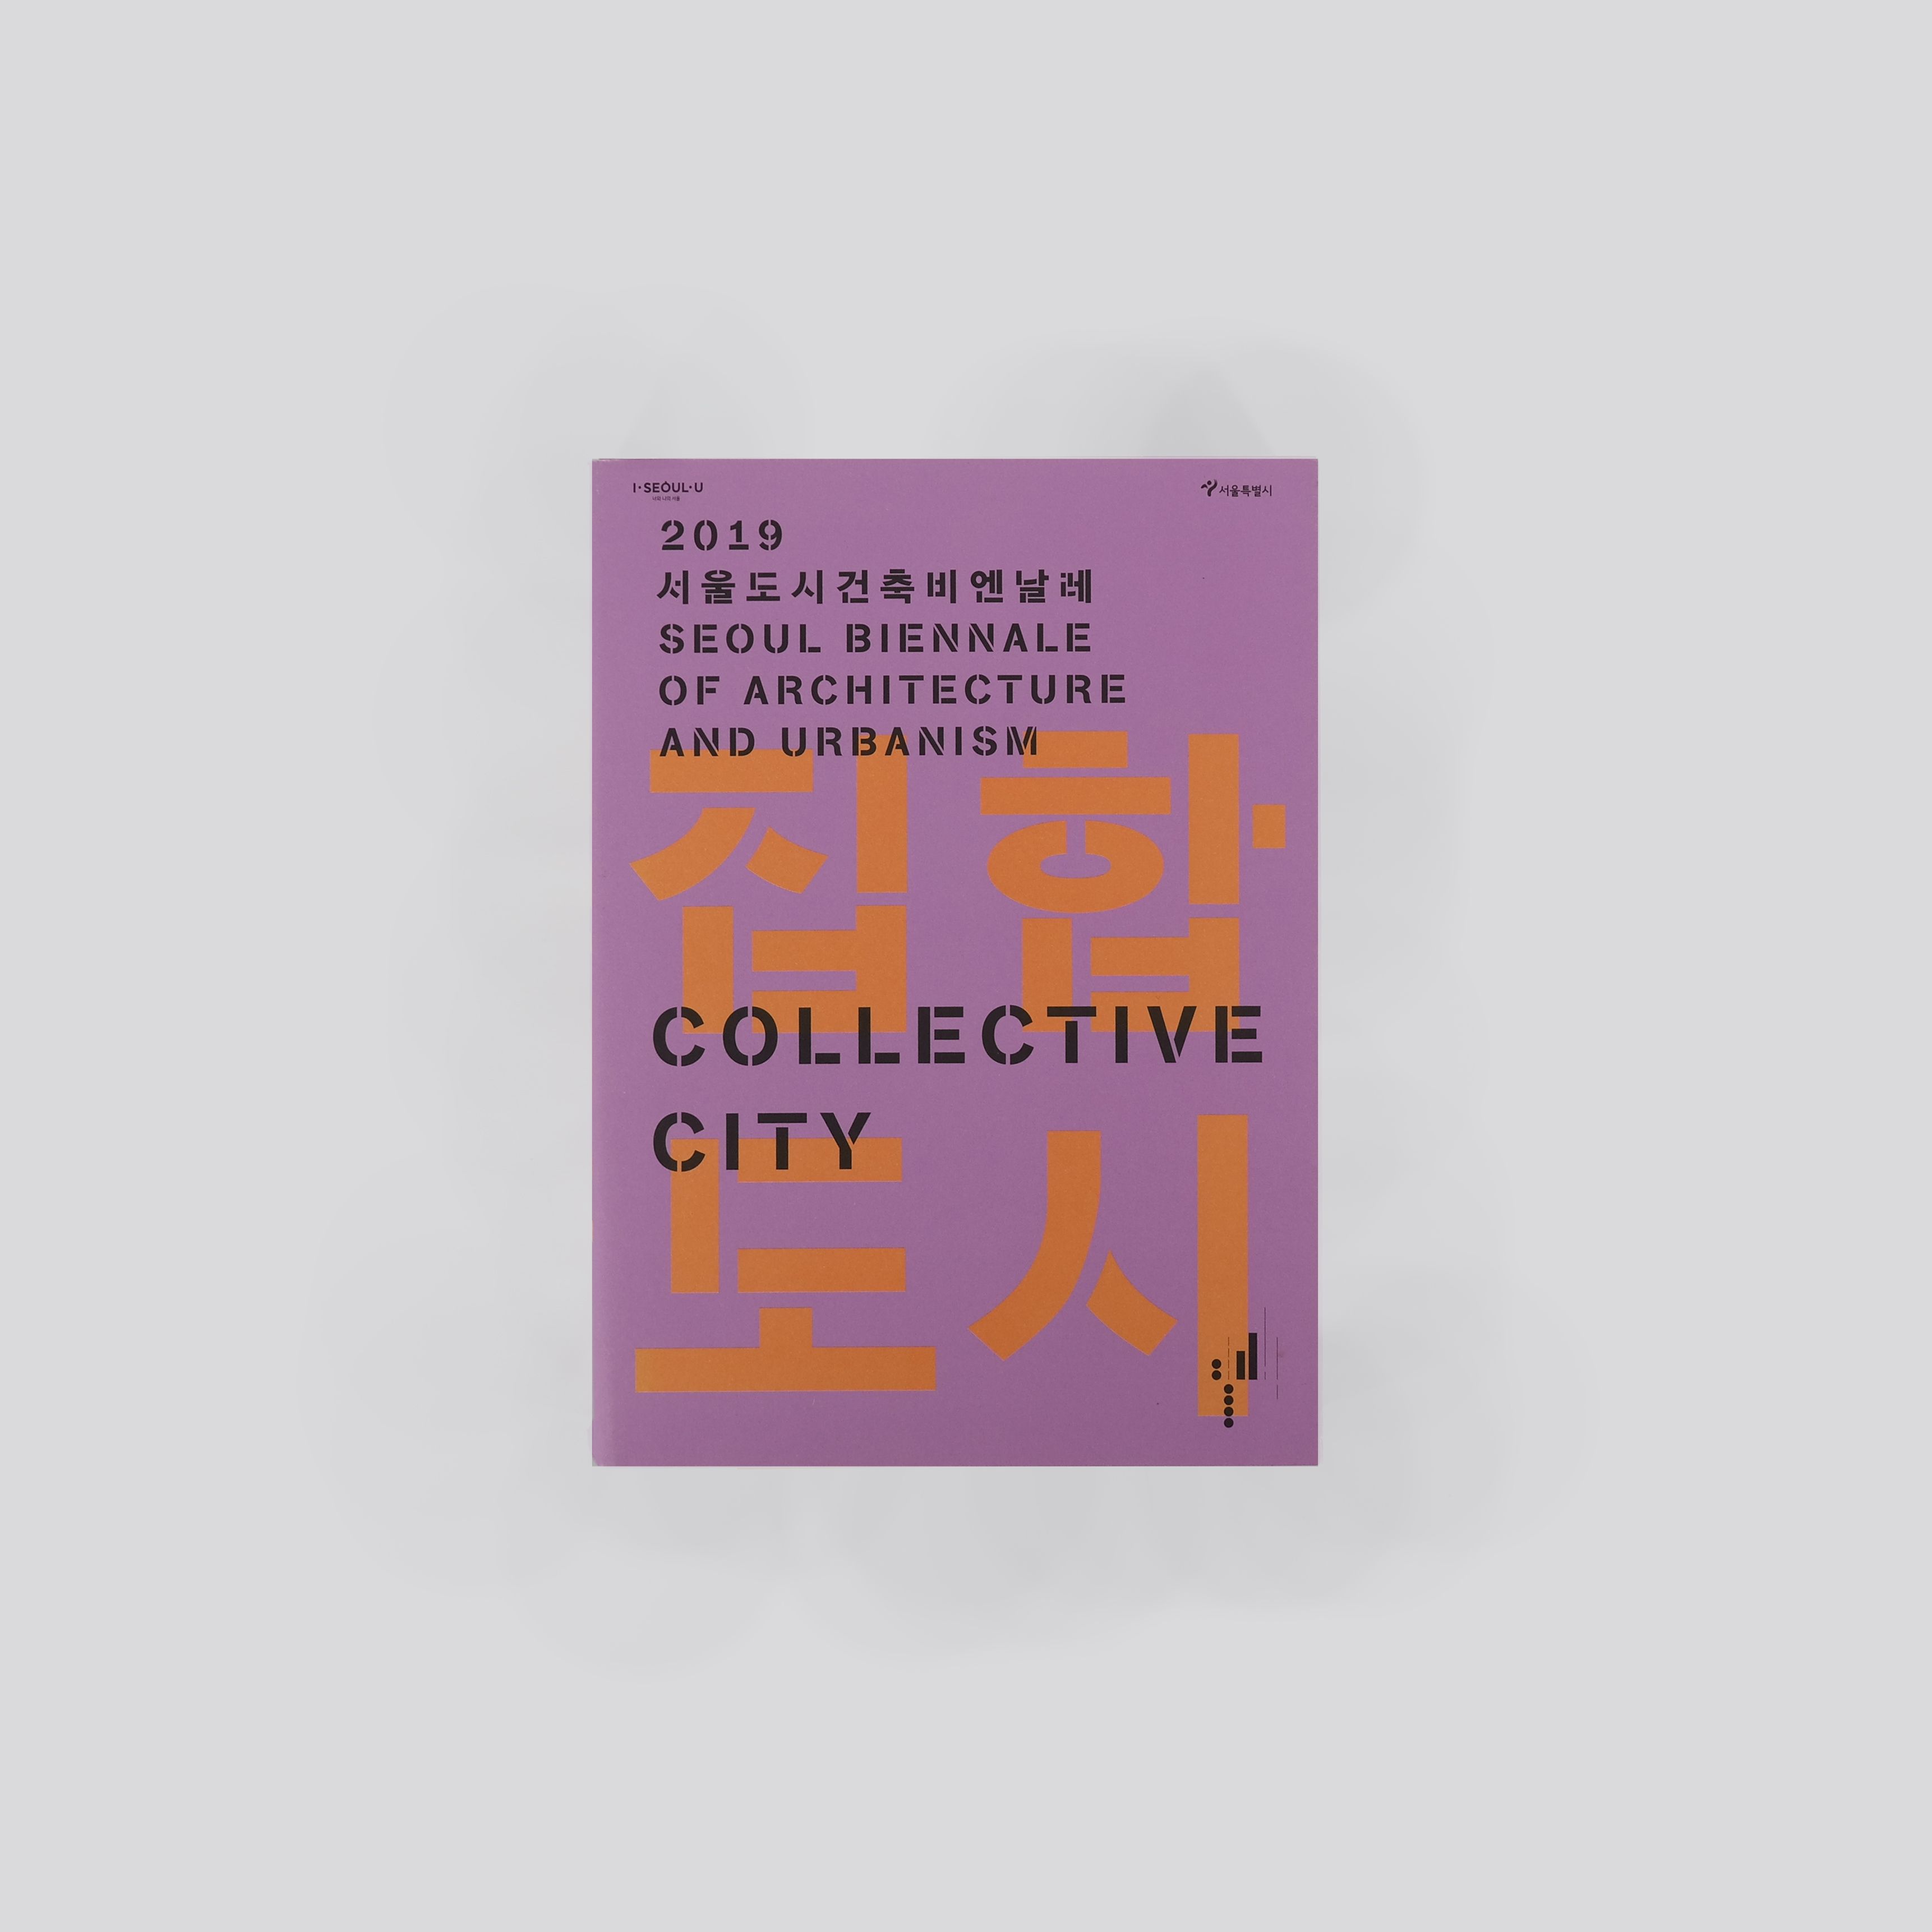 Seoul Biennale of Architecture and Urbanism 2019 - Collective City 집합도시